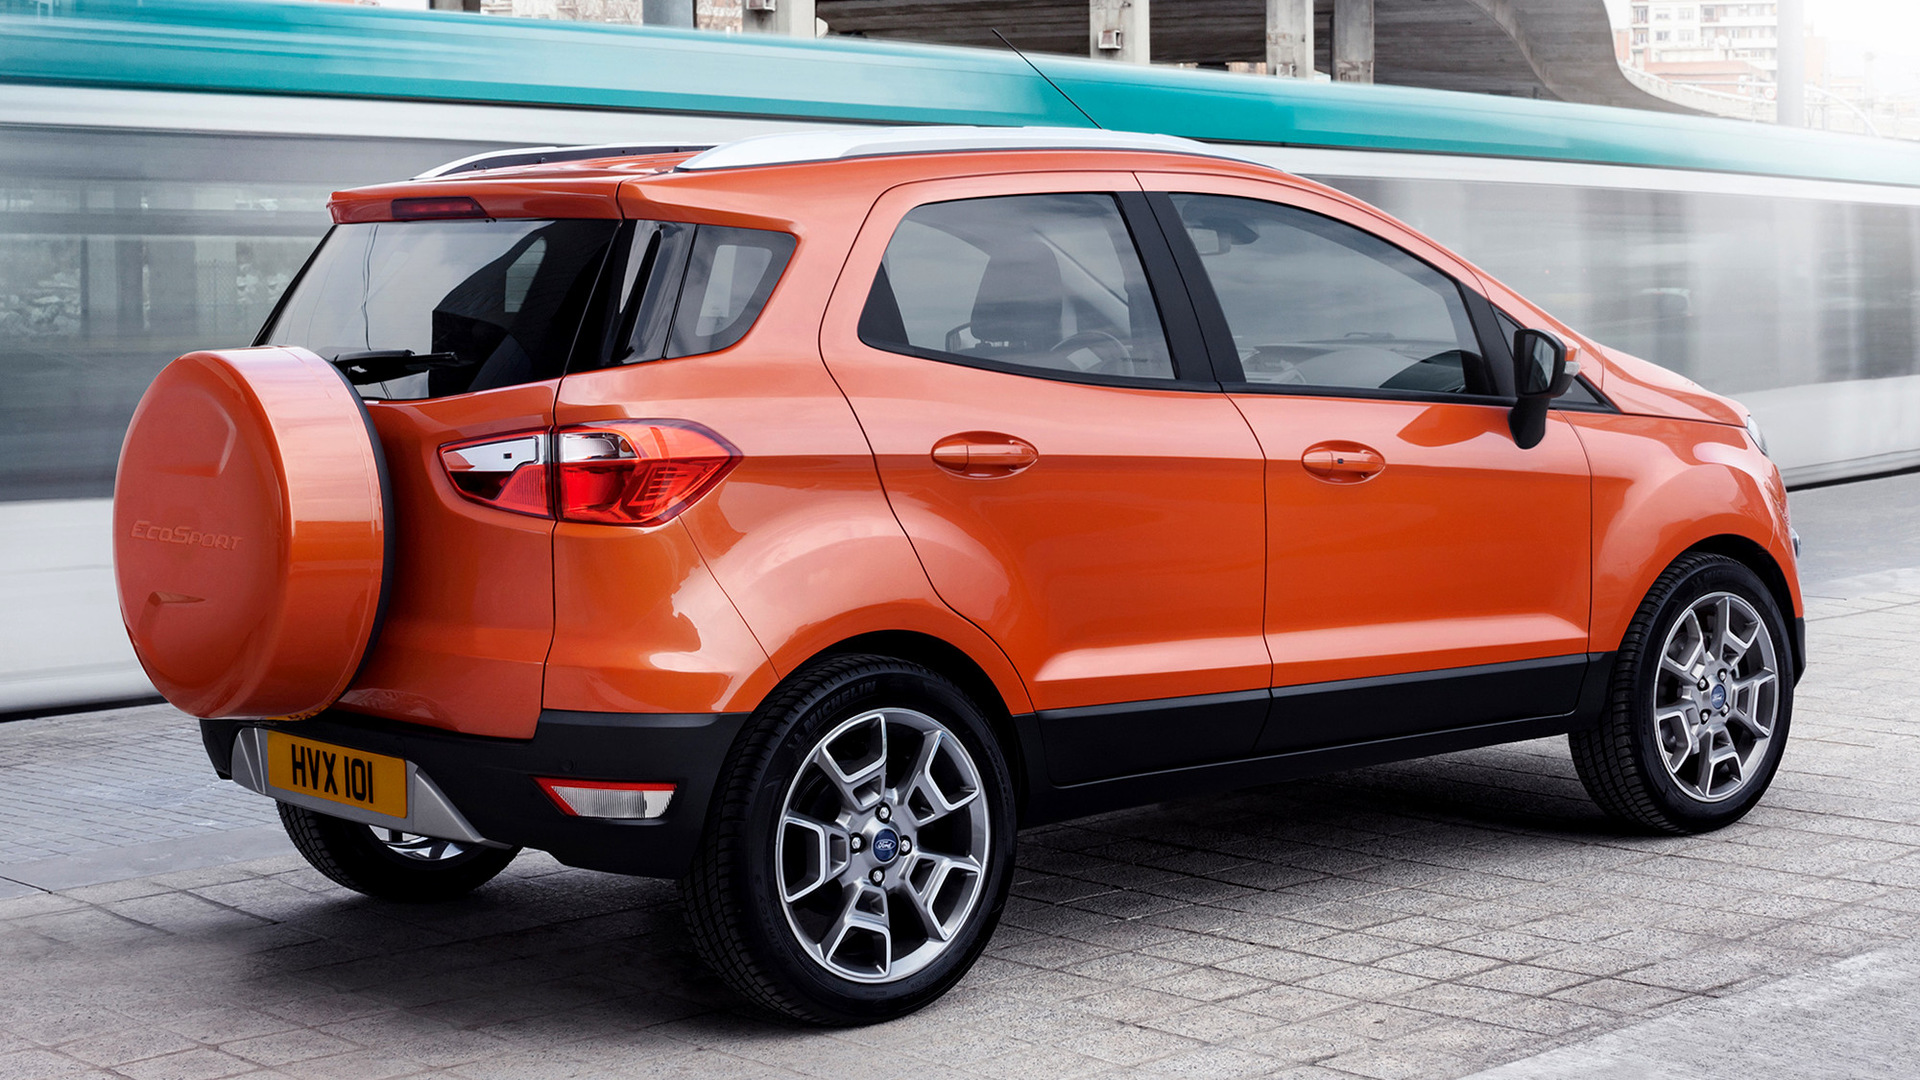 Free download wallpaper Ford, Car, Suv, Ford Ecosport, Vehicles, Orange Car, Crossover Car, Subcompact Car on your PC desktop